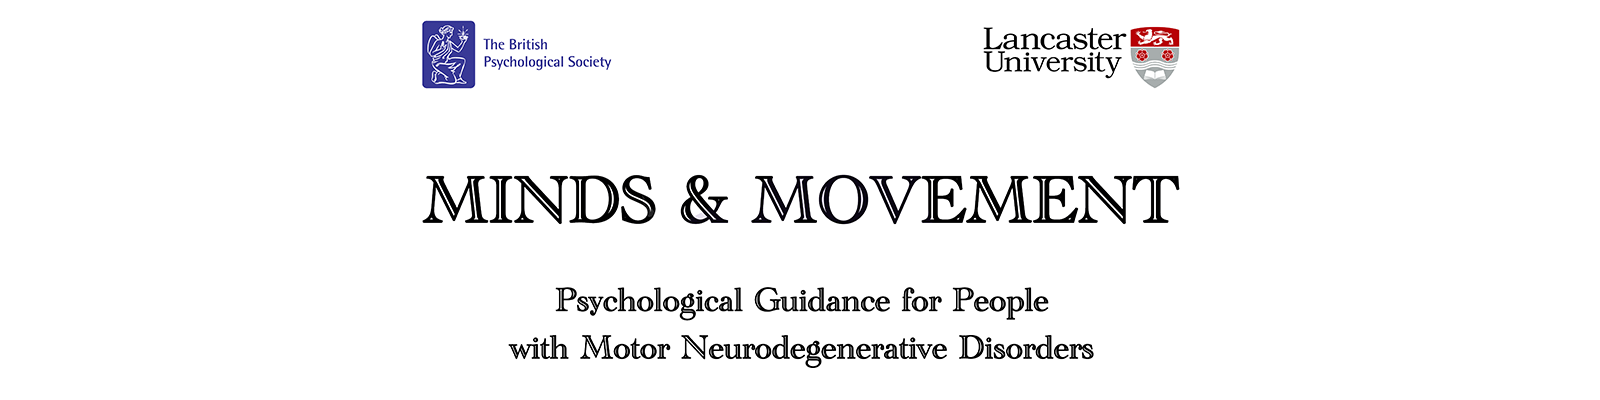 Minds & Movement - a project by Lancaster University and the British Psychological Society